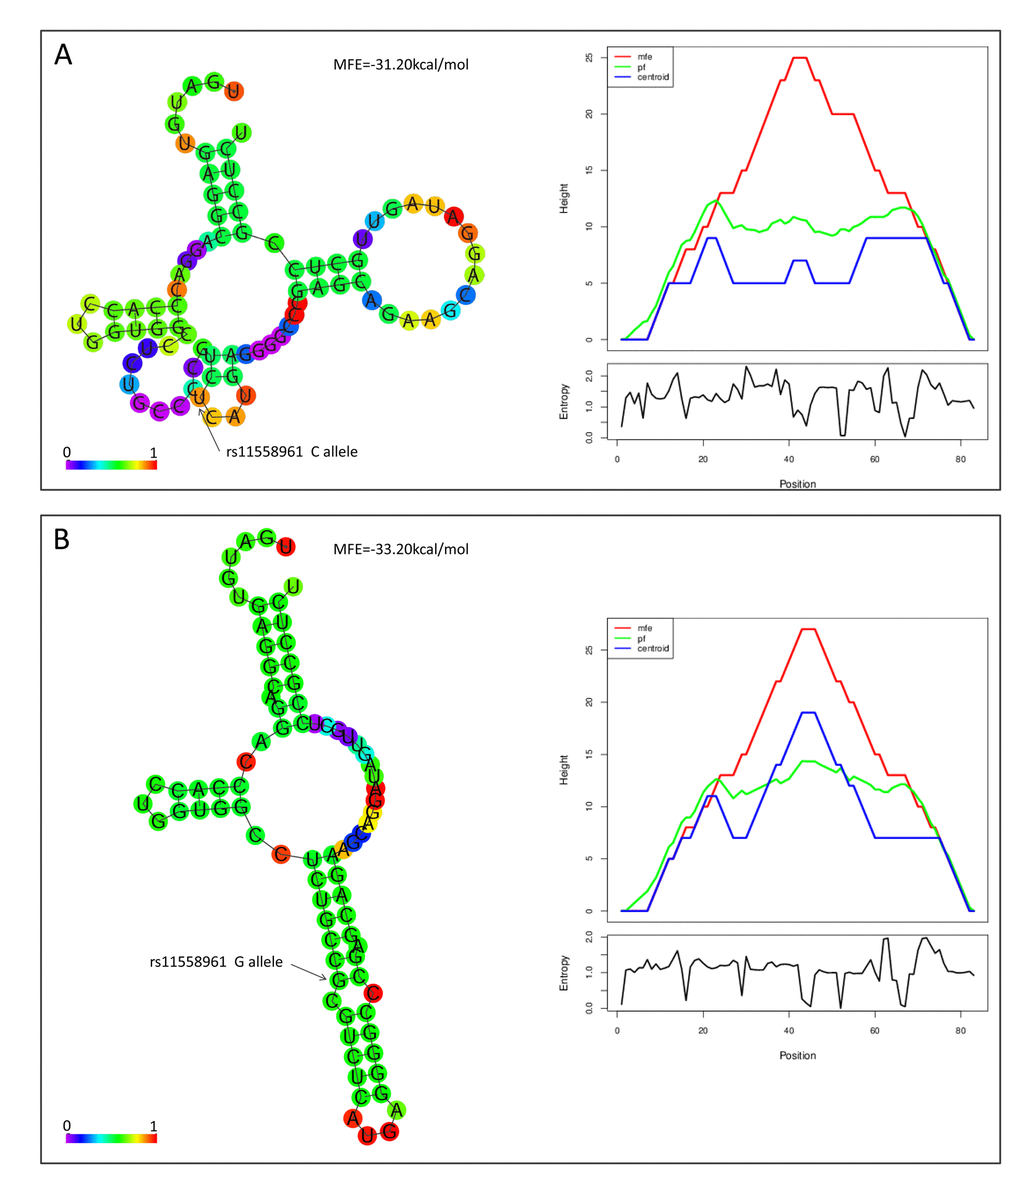 rs11558961 affected secondary structure of GFAP mRNA. In silico prediction of rs11558961 impact on RNA folding structures. The structures and Mountain plots for free energy or entropy corresponding to rs11558961C (A) or G allele (B). With G allele, there was an emerging miR-139 binding site exposed.